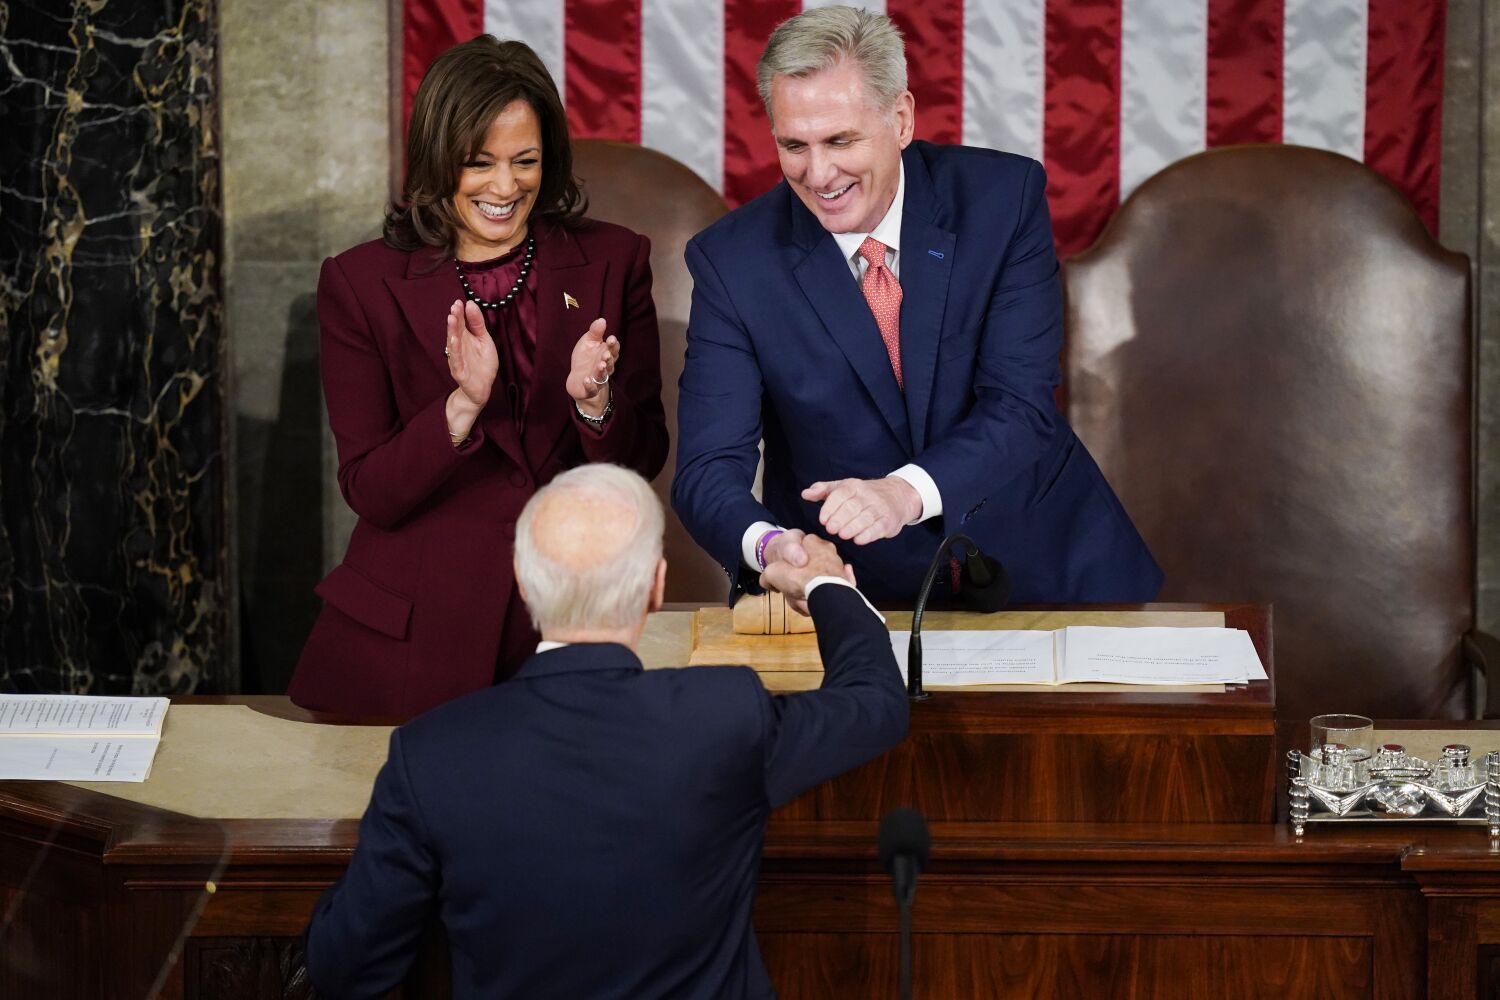 Why Biden’s State of the Union speech may boost reelection prospects